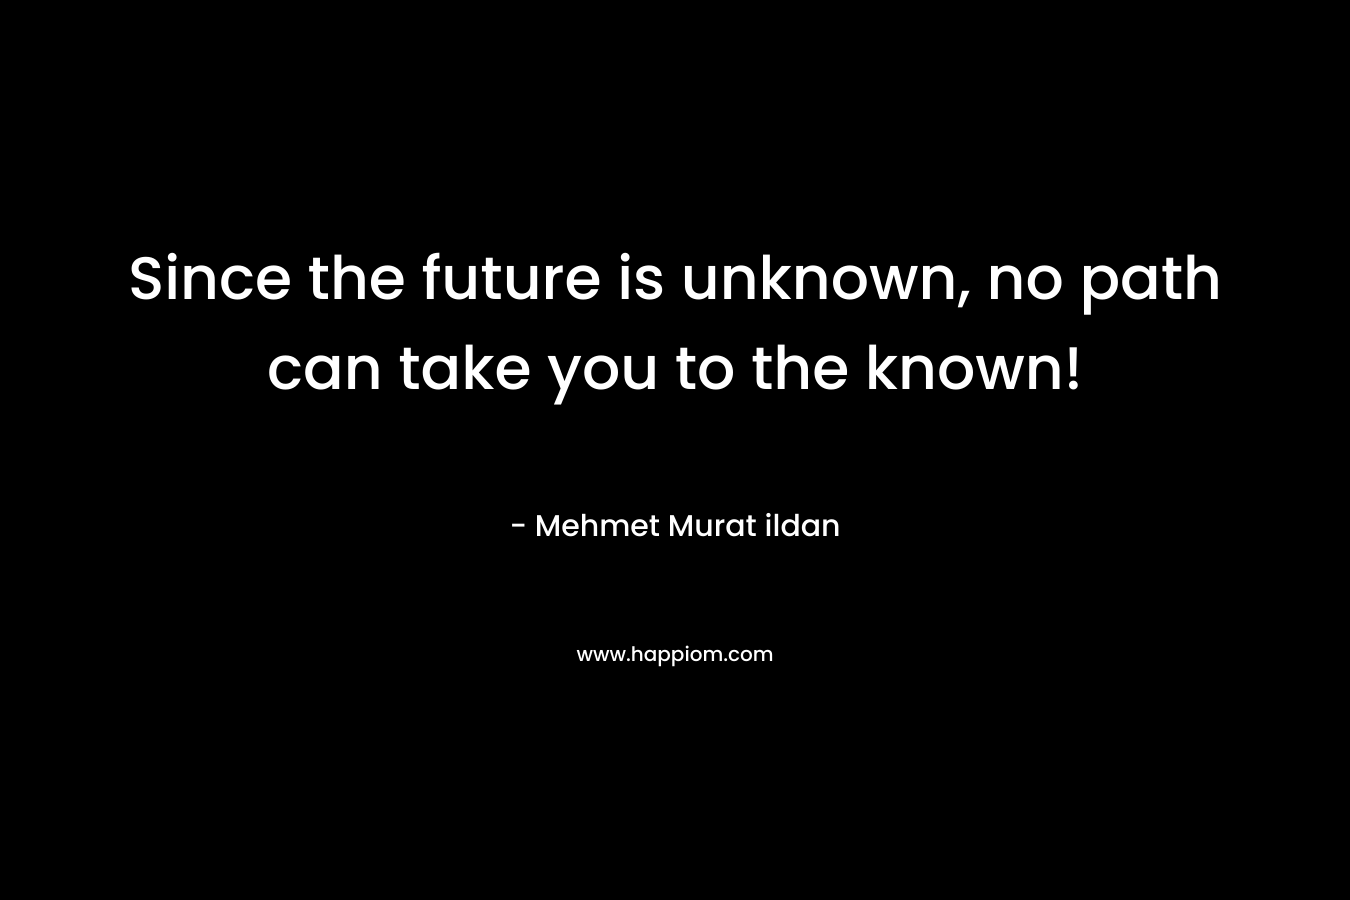 Since the future is unknown, no path can take you to the known!